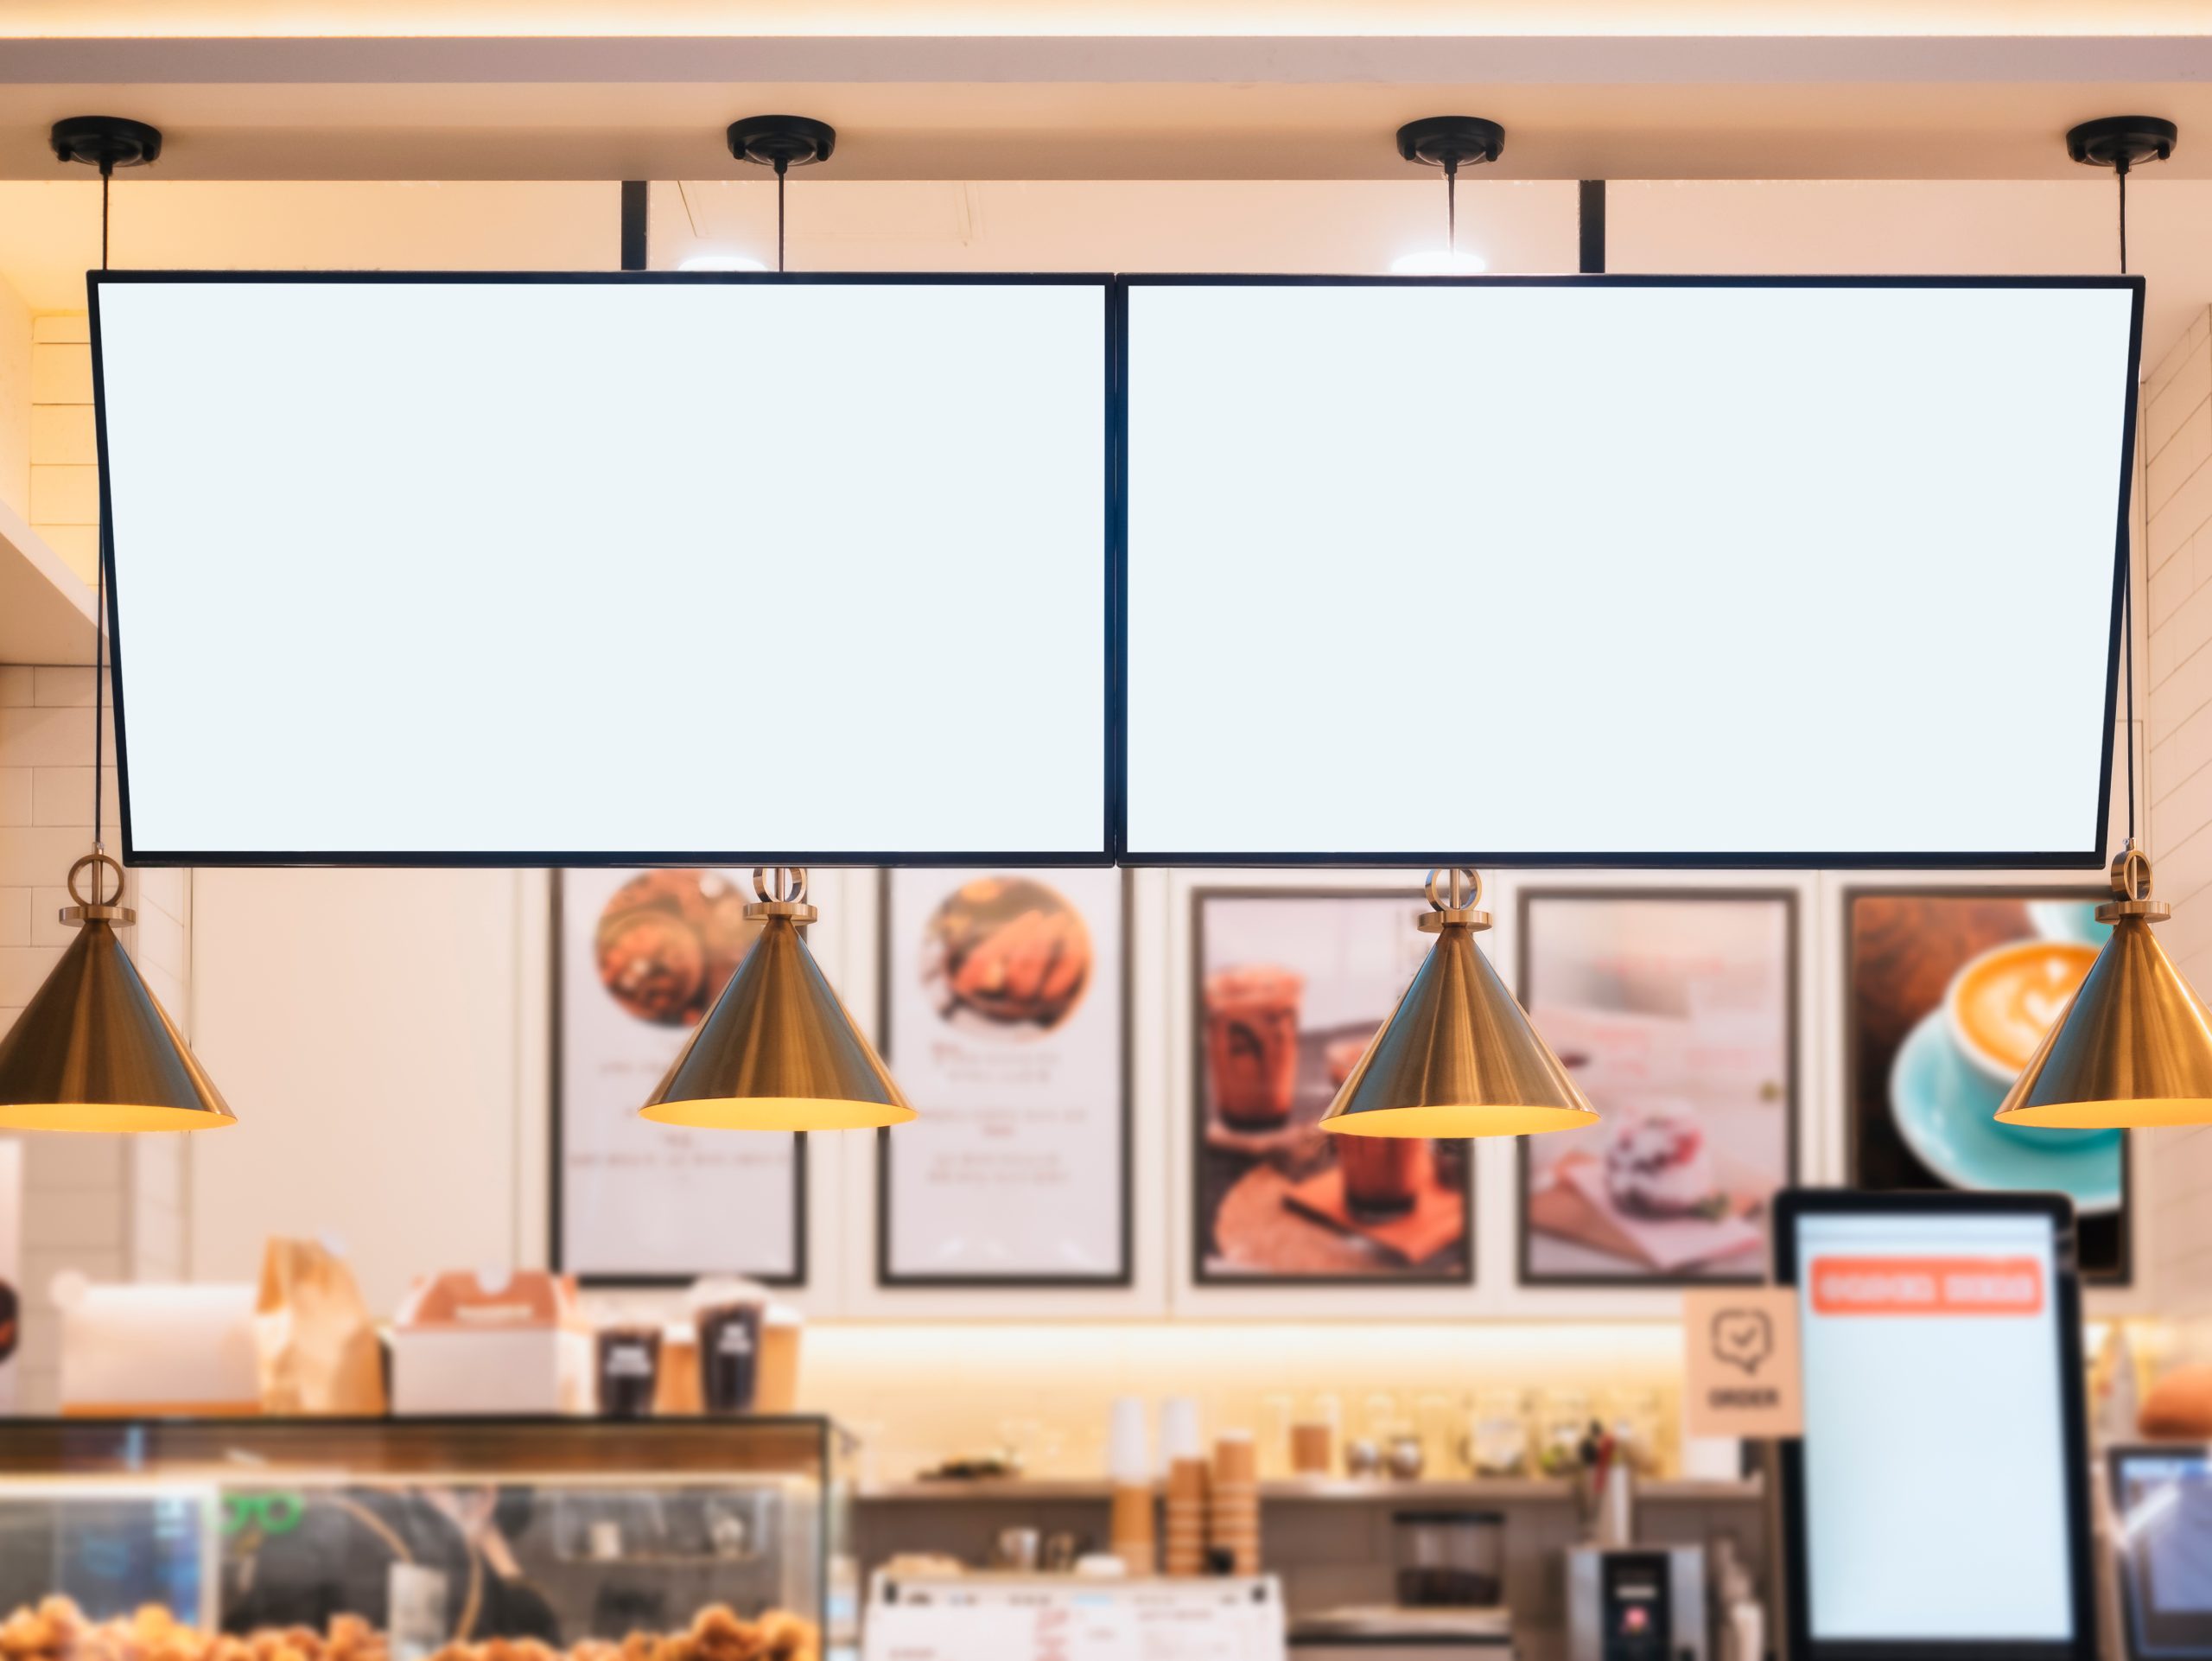 Two large digital screens are hung over a café counter, with analog signage behind the counter.